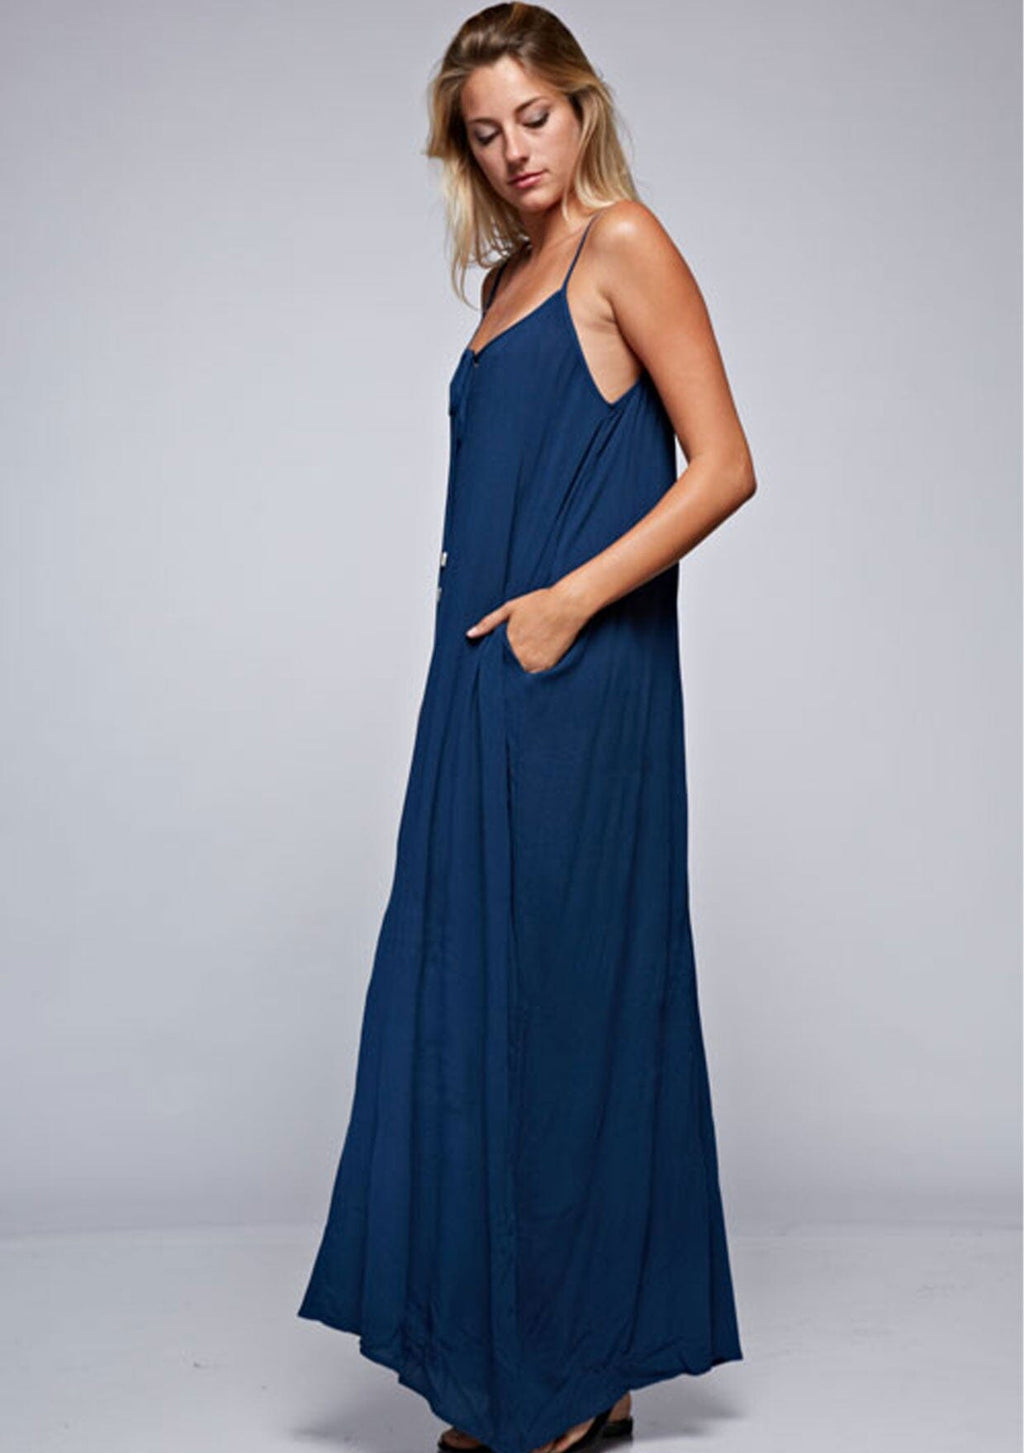 Bohemian Maxi Dress With Keyhole Tie Front | LOVESTITCH